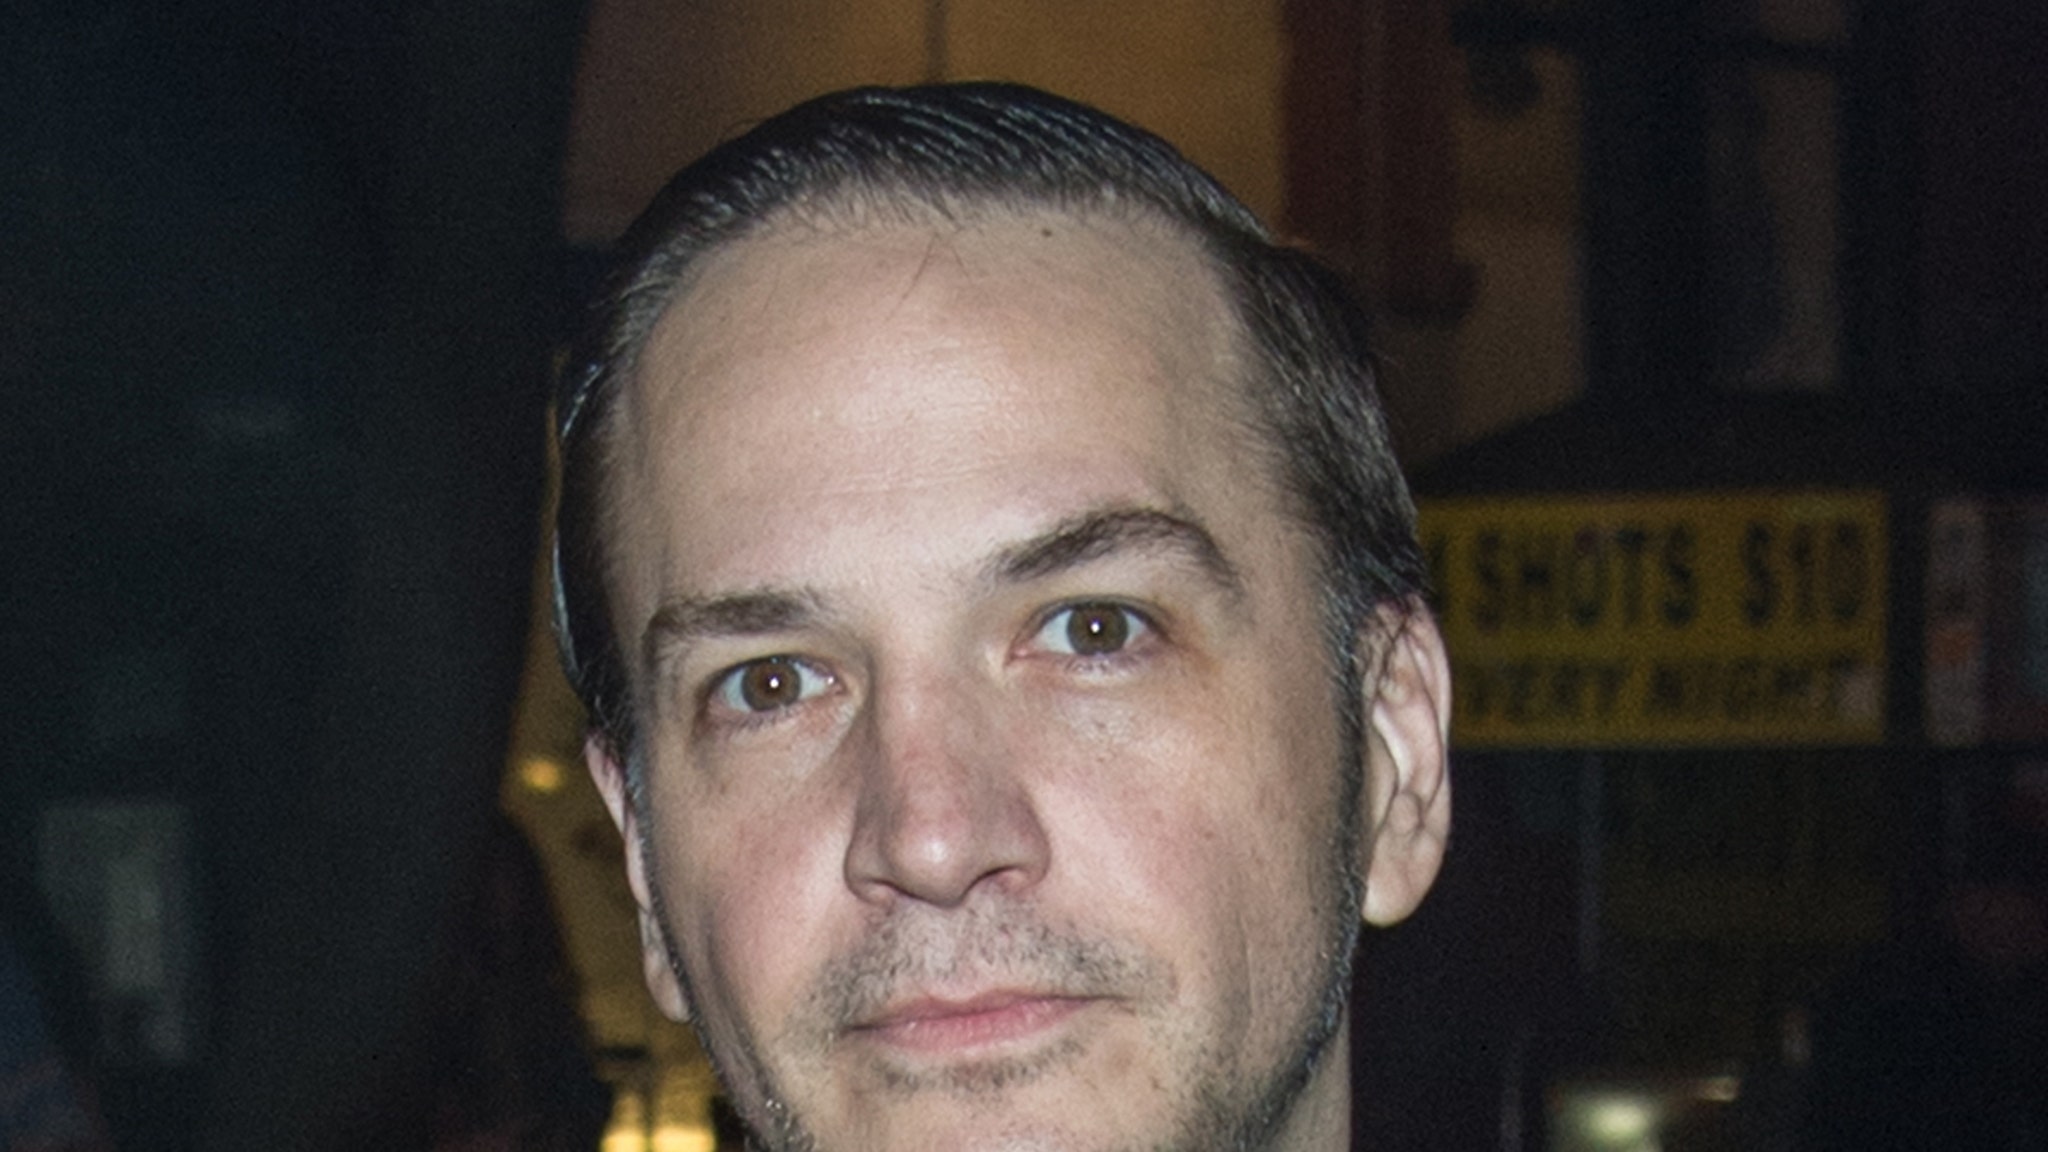 Club Kids co-founder Michael Alig, found dead in New York, suspected of heroin overdose